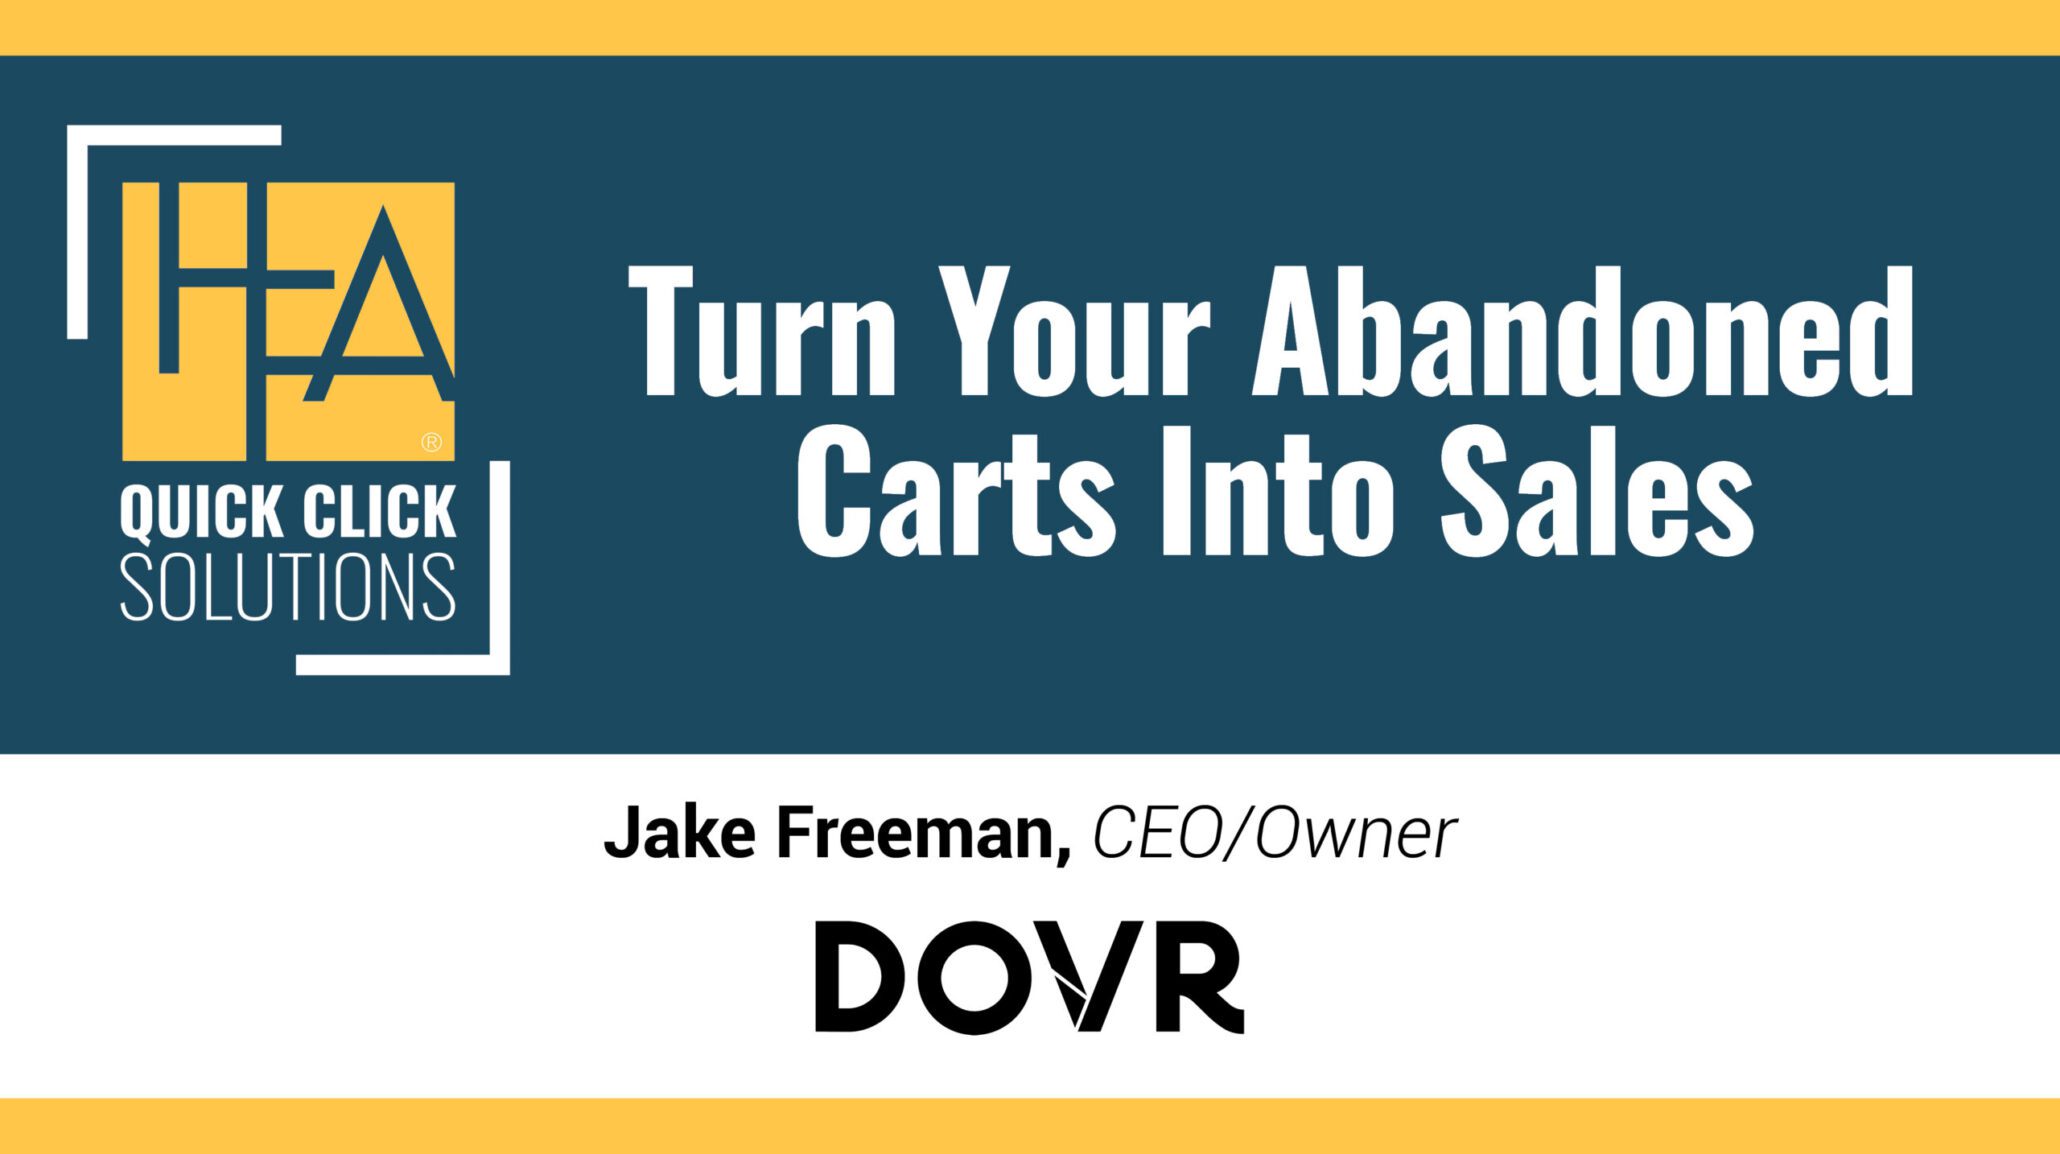 HFA-QCS Turn Your Abandoned Carts Into Sales